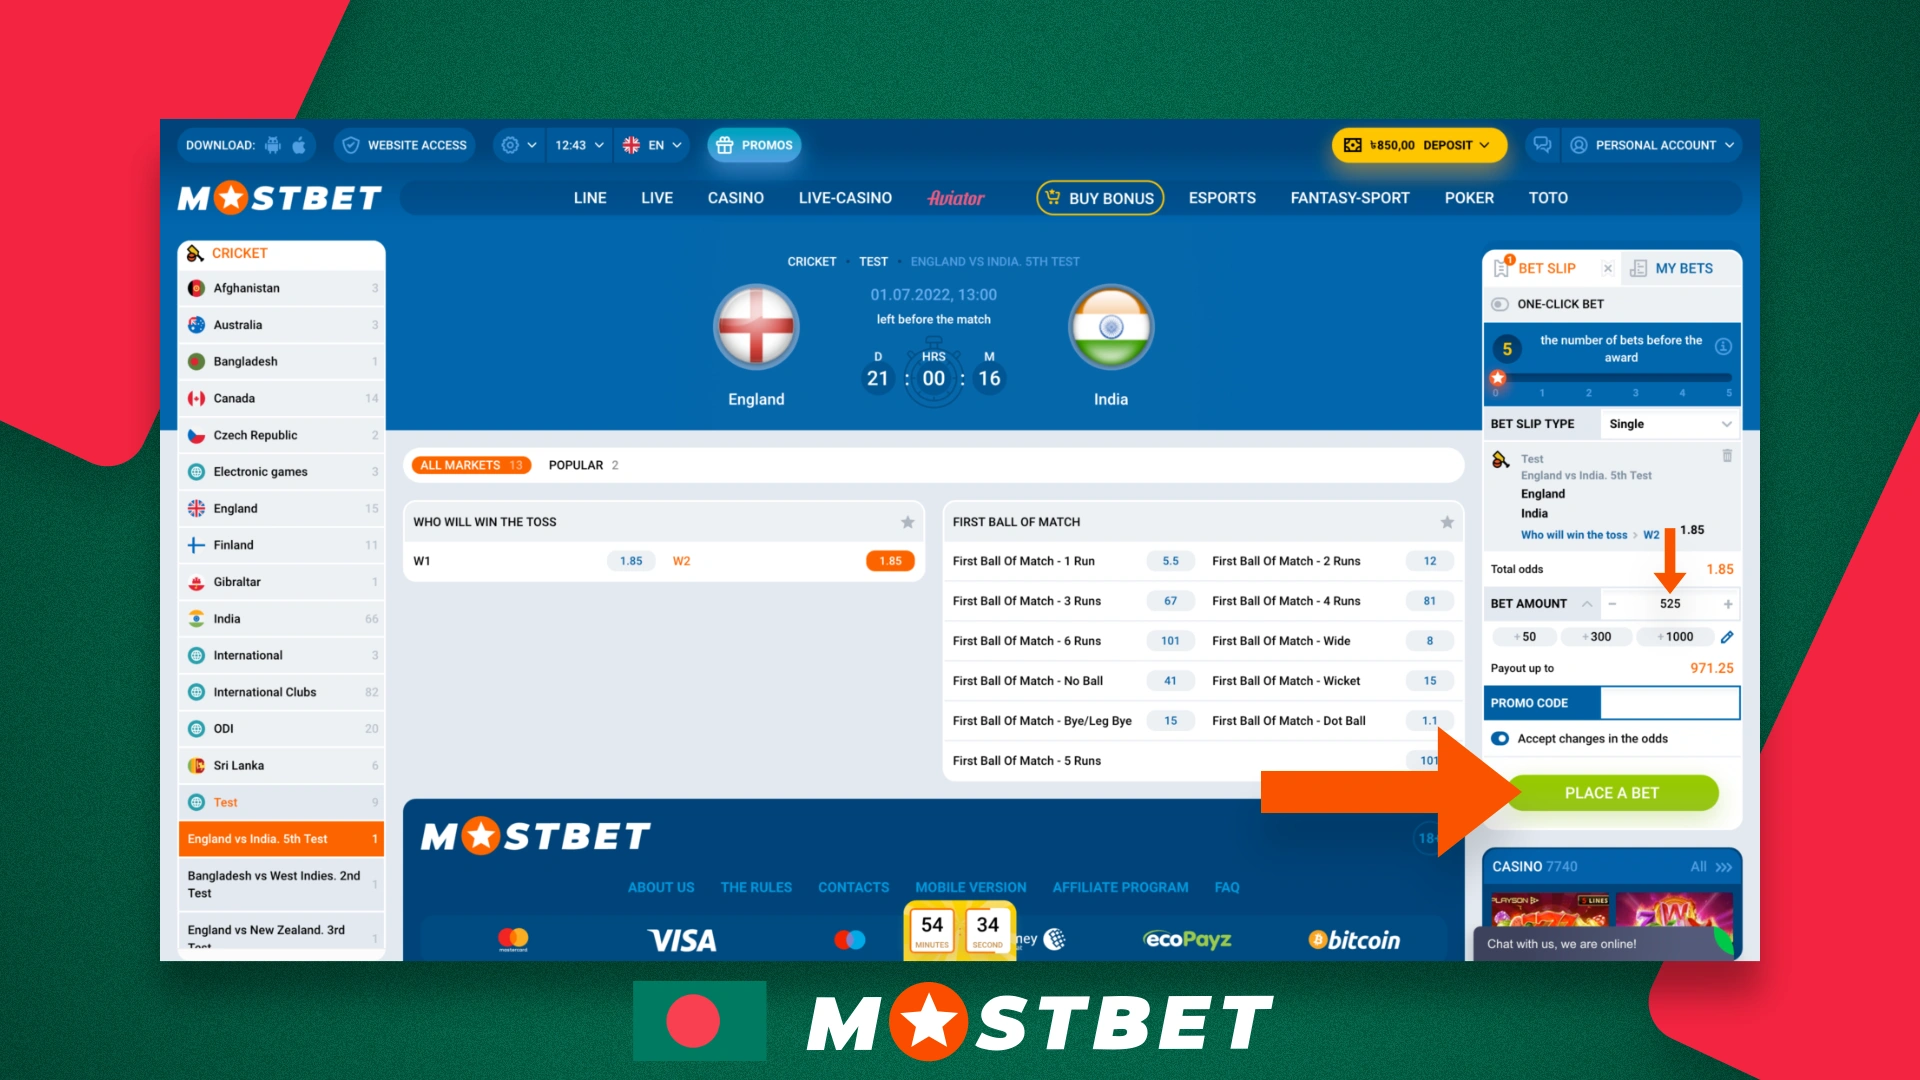 A step-by-step guide on how to bet on the Mostbet Bangladesh website